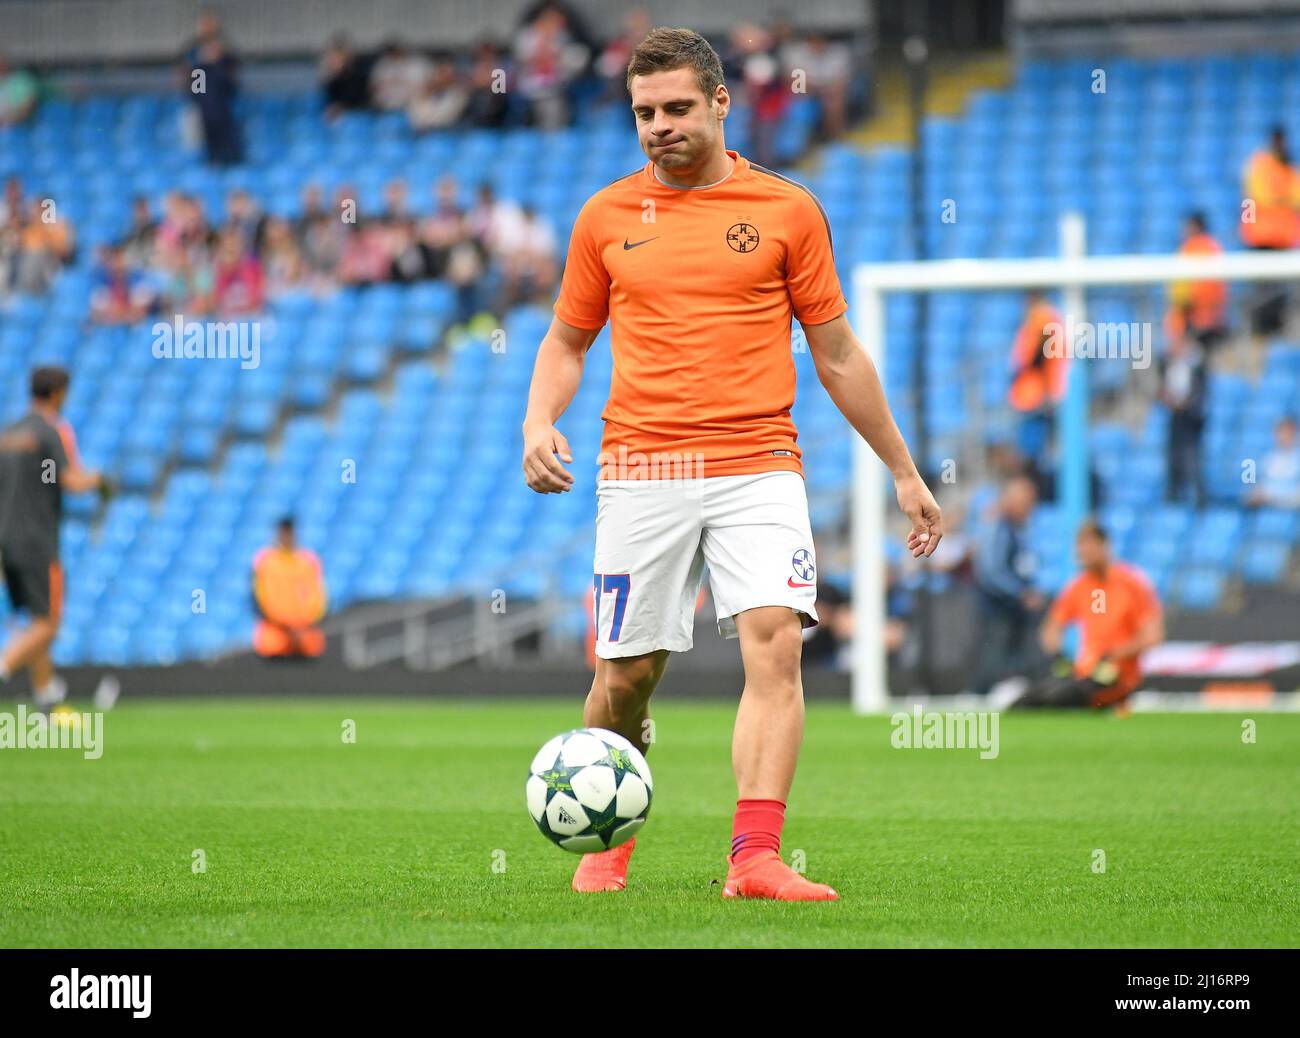 MANCHESTER, ENGLAND - AUGUST 24, 2016: Adrian Popa of FCSB pictured during the second leg of the 2016/17 UEFA Champions League tie between Manchester City (Engalnd) and FCSB (Romania) at Etihad Stadium. Copyright: Cosmin Iftode/Picstaff Stock Photo